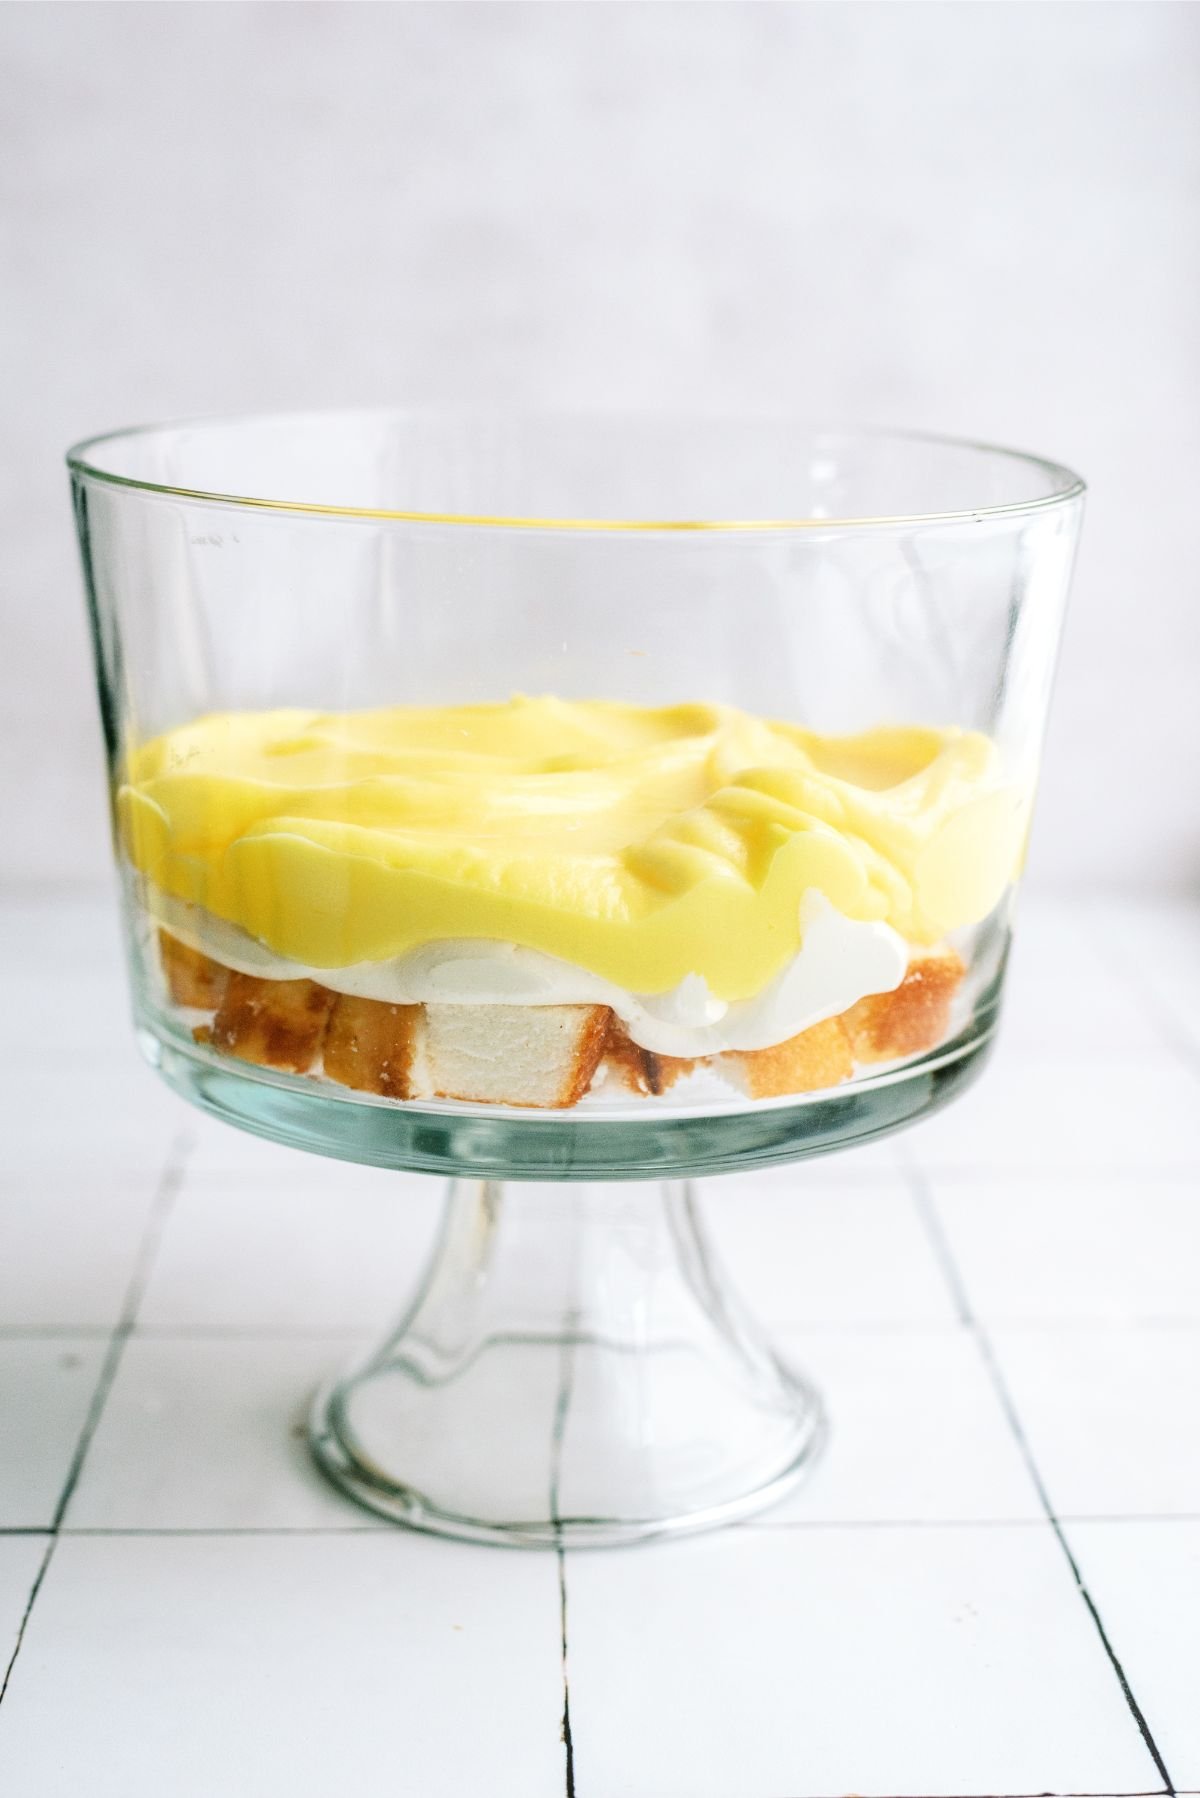 Lemon pudding mixture on top of cream cheese mixture in trifle dish